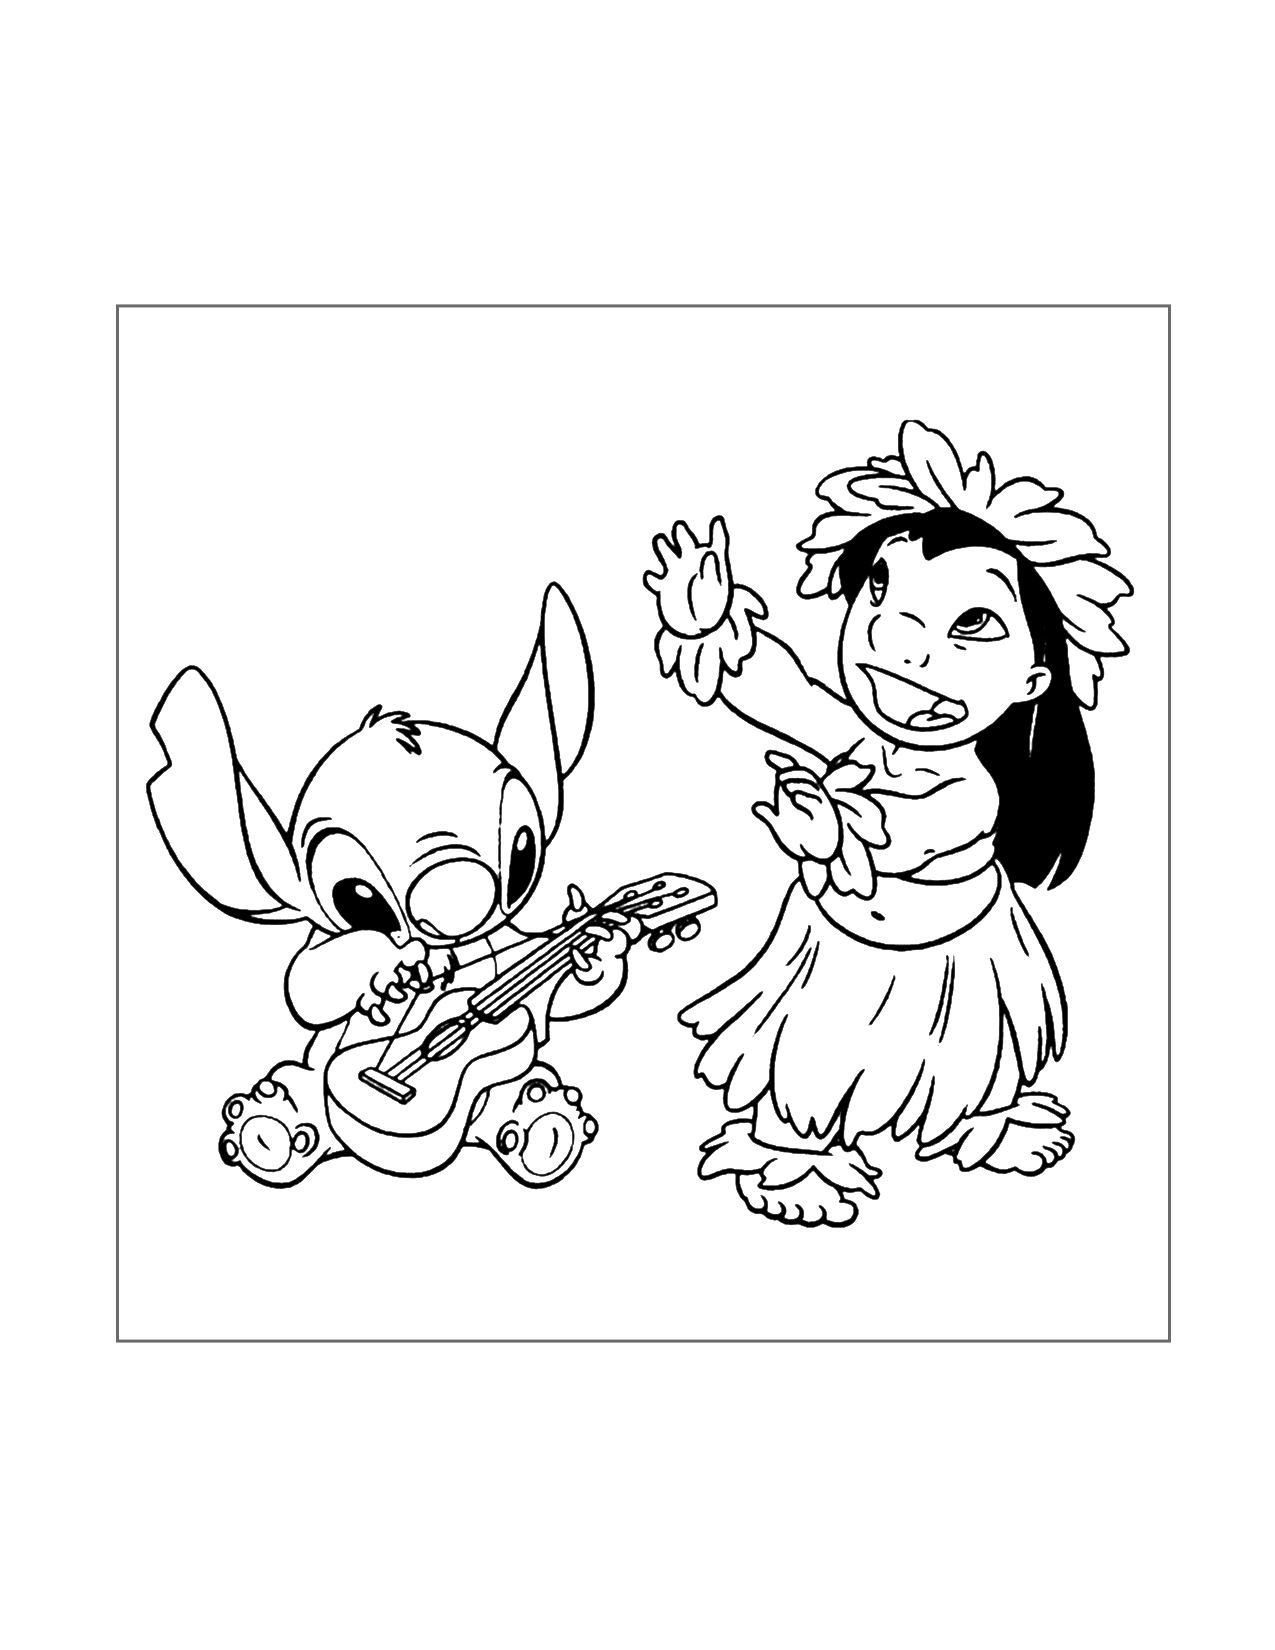 Lilo And Stitch Singing And Dancing Coloring Page